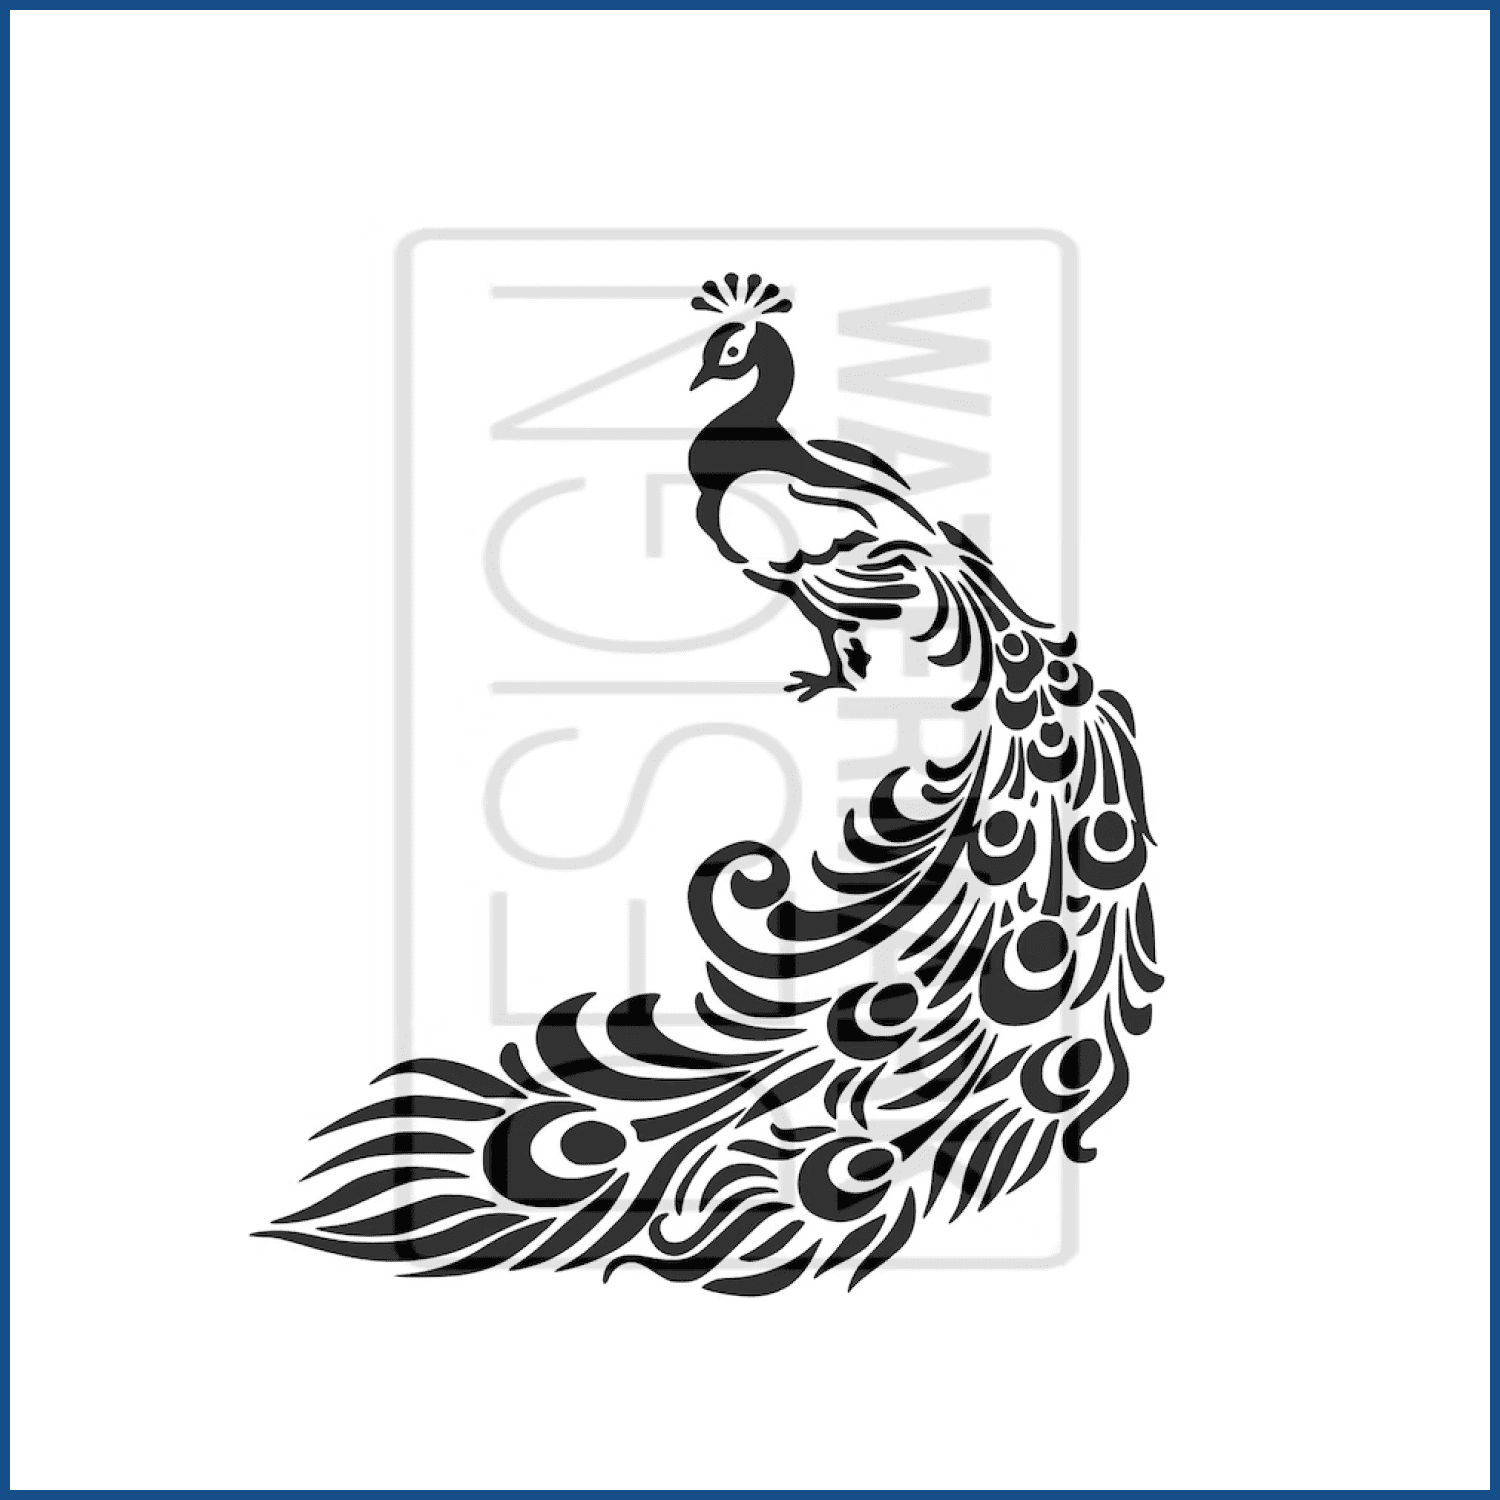 Black and white drawing of a peacock.